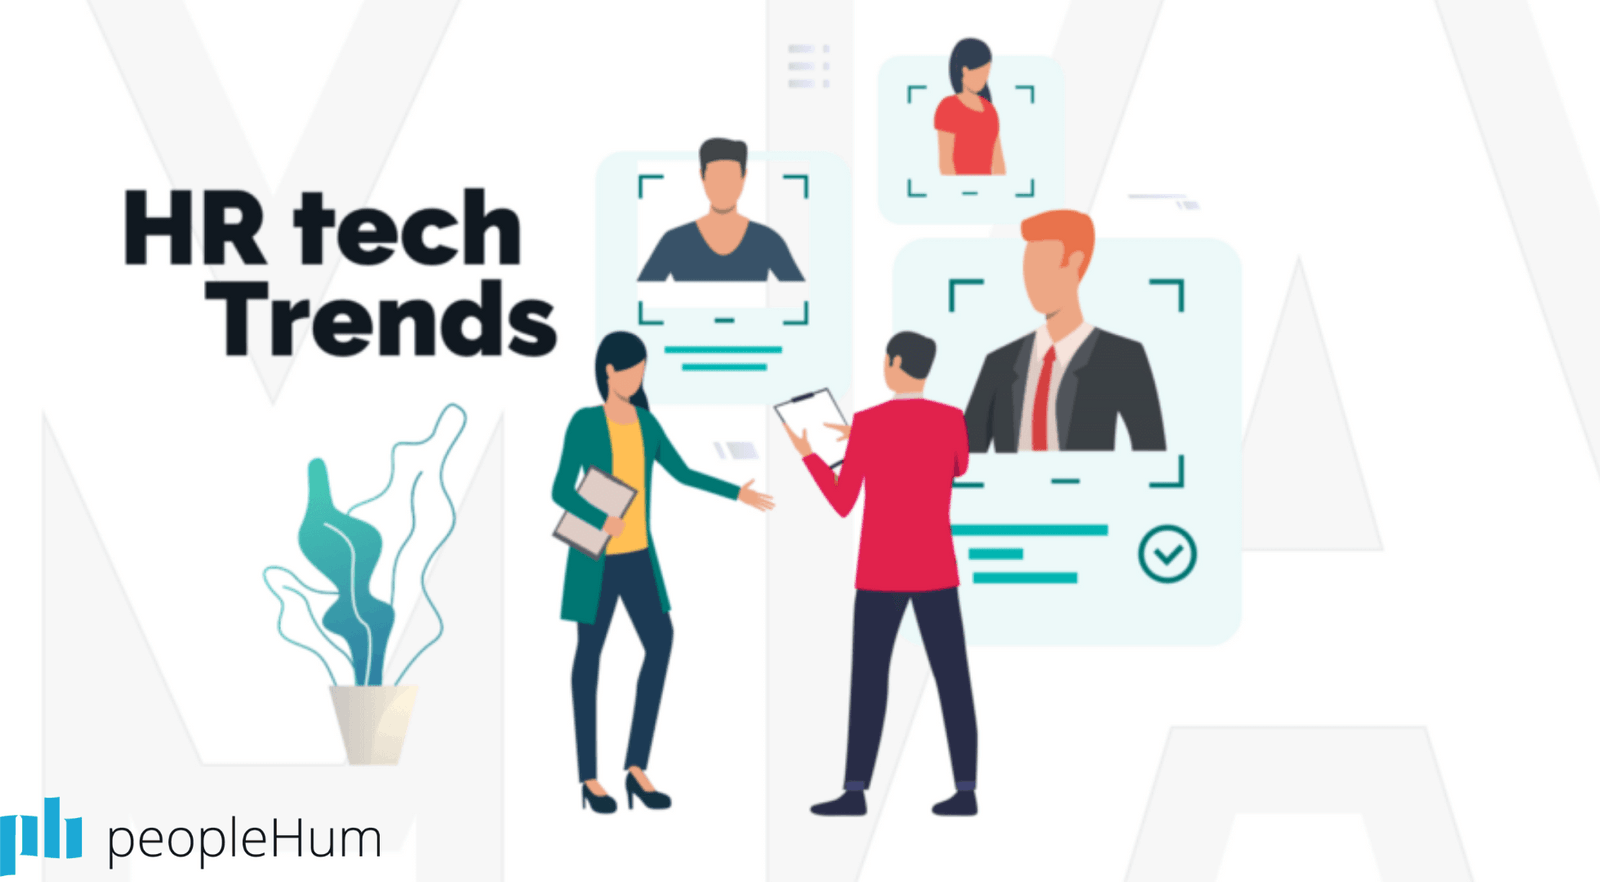 7 HR tech trends to look out for in 2022 by PeopleHum